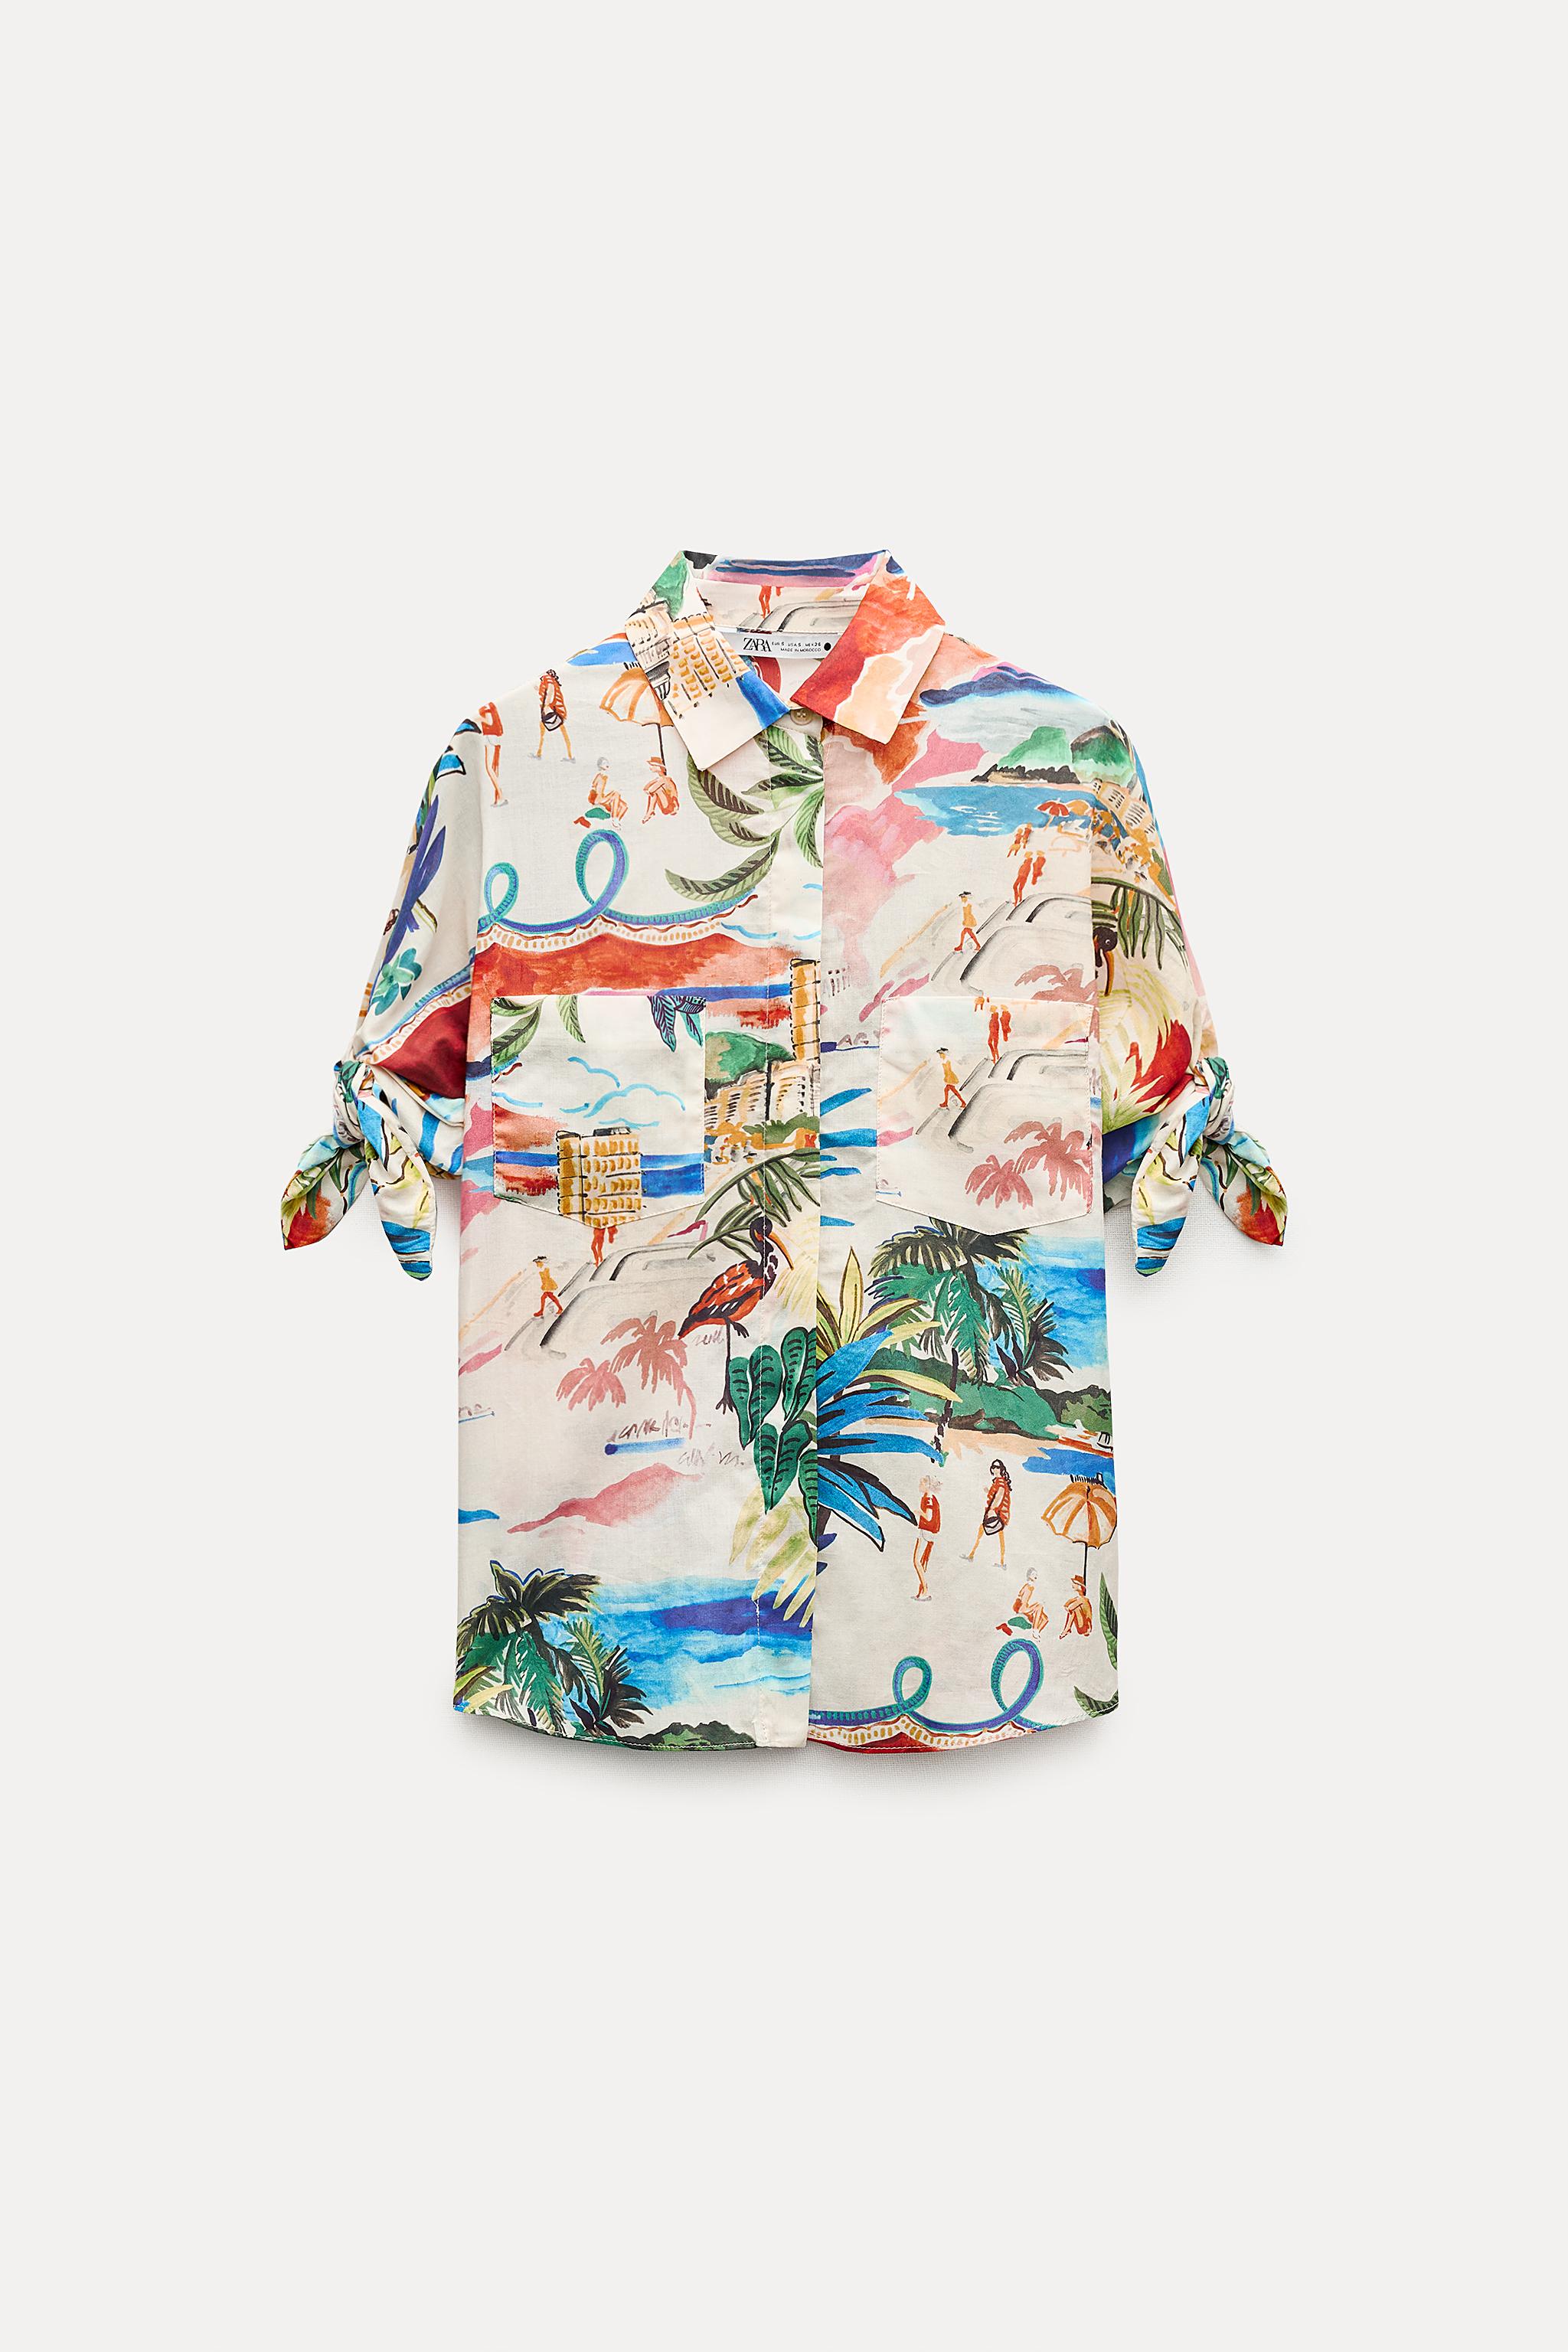 PRINTED SHIRT ZW COLLECTION - Multicolored | ZARA United States